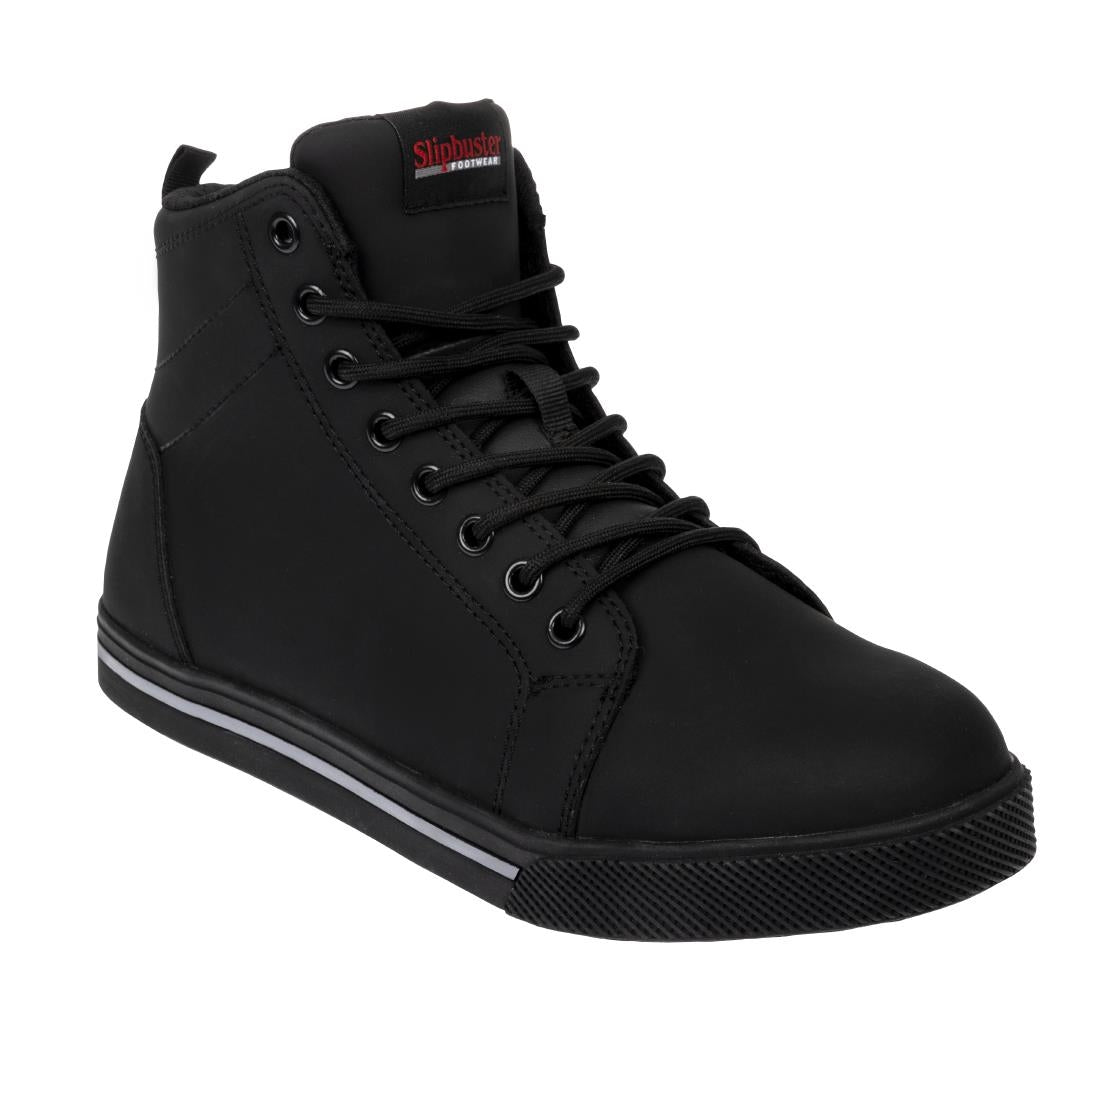 BA061-37 Slipbuster Recycled Microfibre Safety Hi Top Boots Matte Black 37 JD Catering Equipment Solutions Ltd